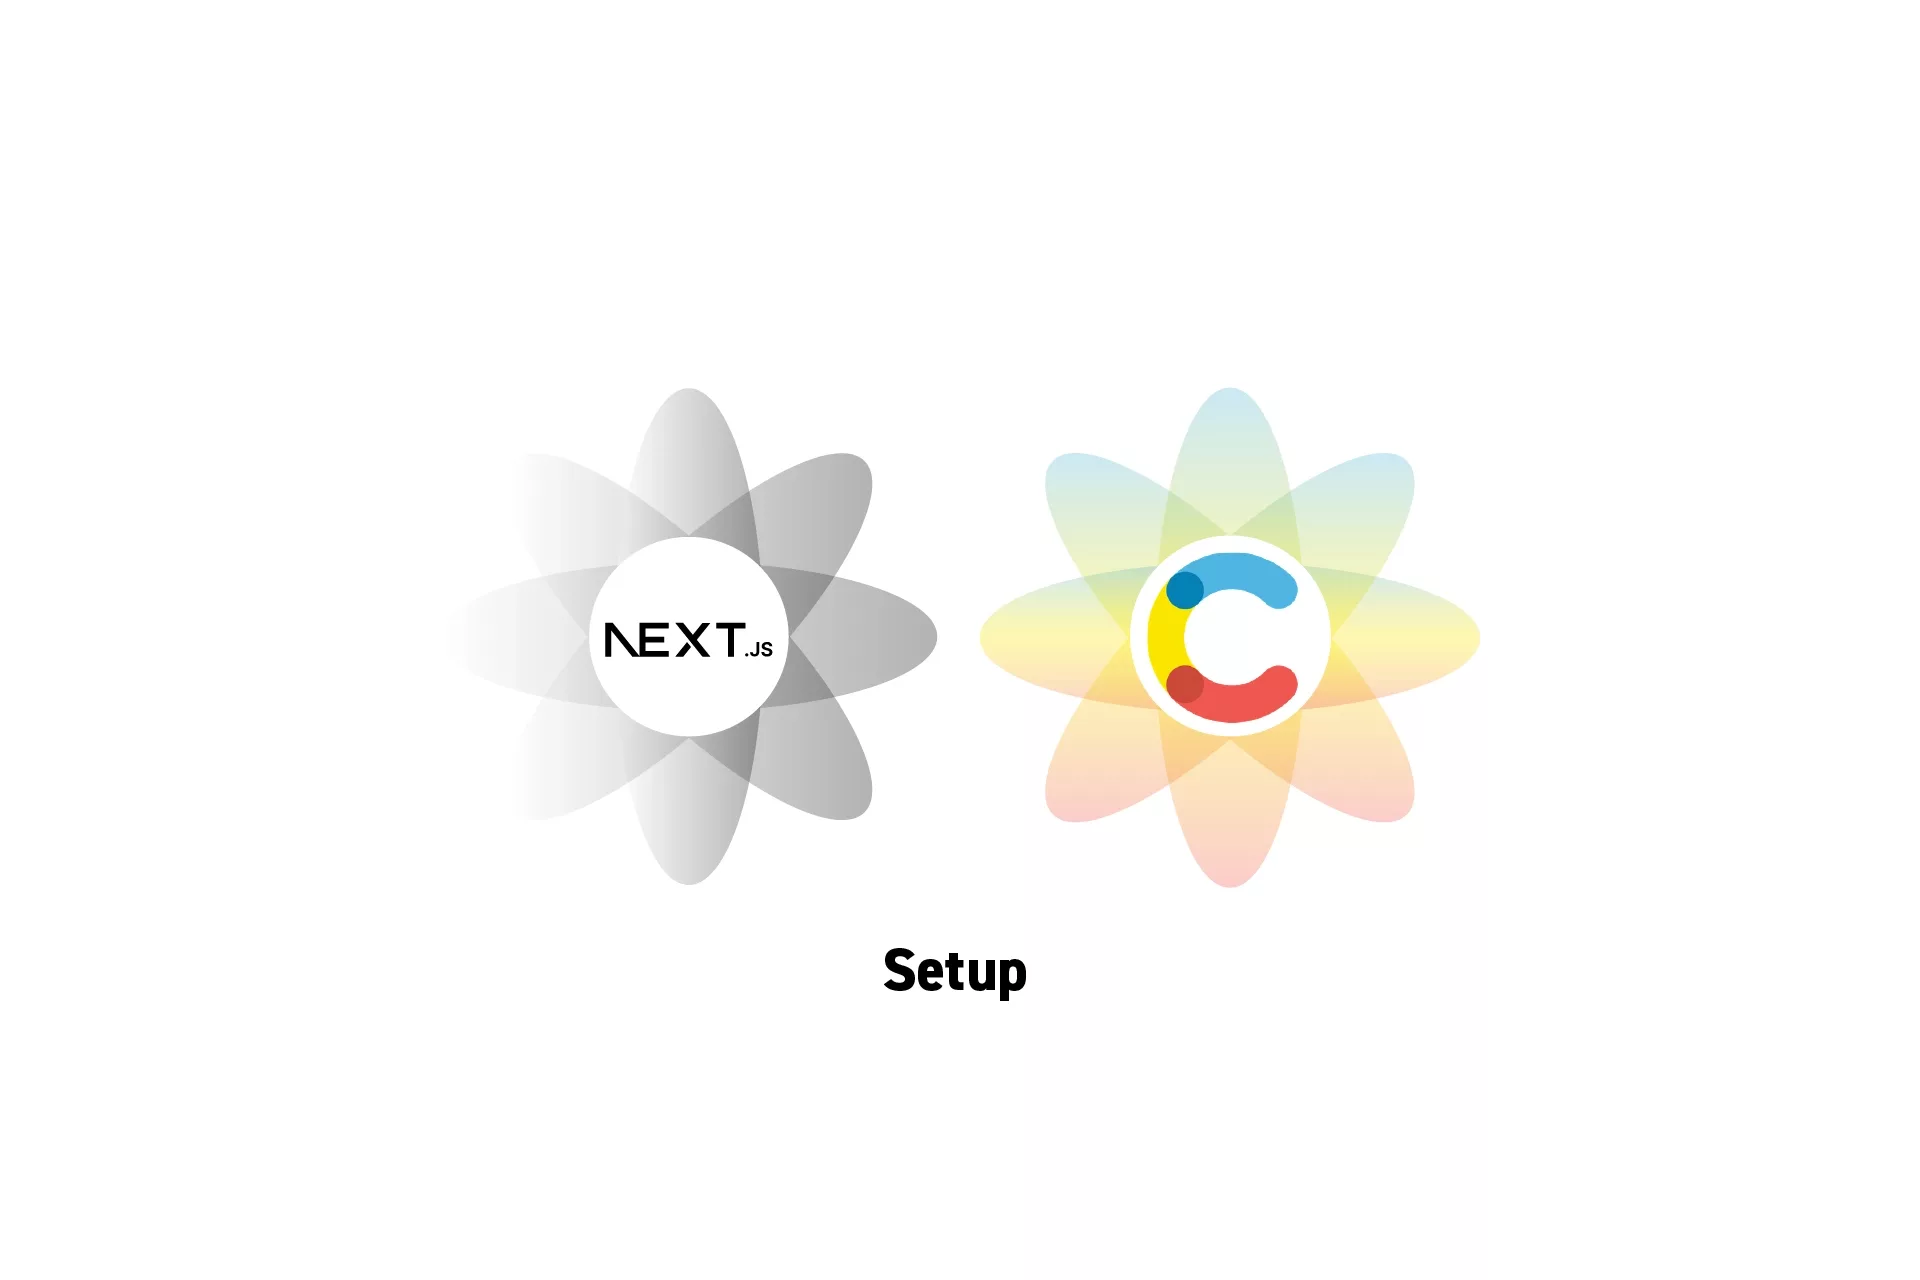 Two flowers that represents NextJS and Contentful side by side with the text "Setup” beneath it.